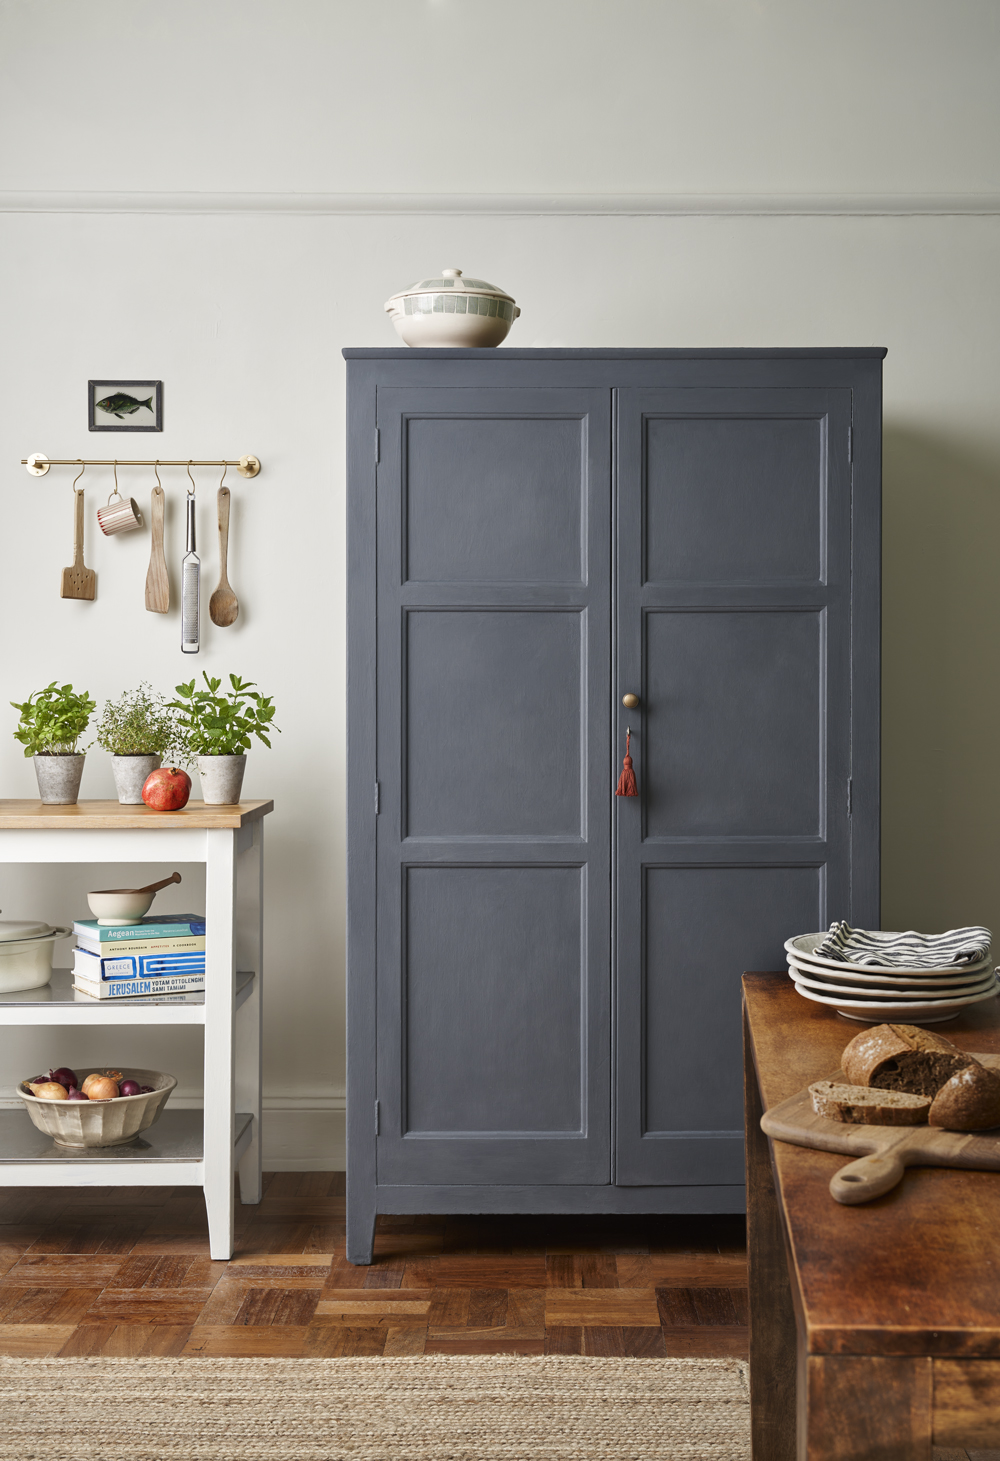 Minimal, Modern Kitchen Lifestyle Image Featuring Armoire Painted in Whistler Grey Chalk Paint by Annie Sloan